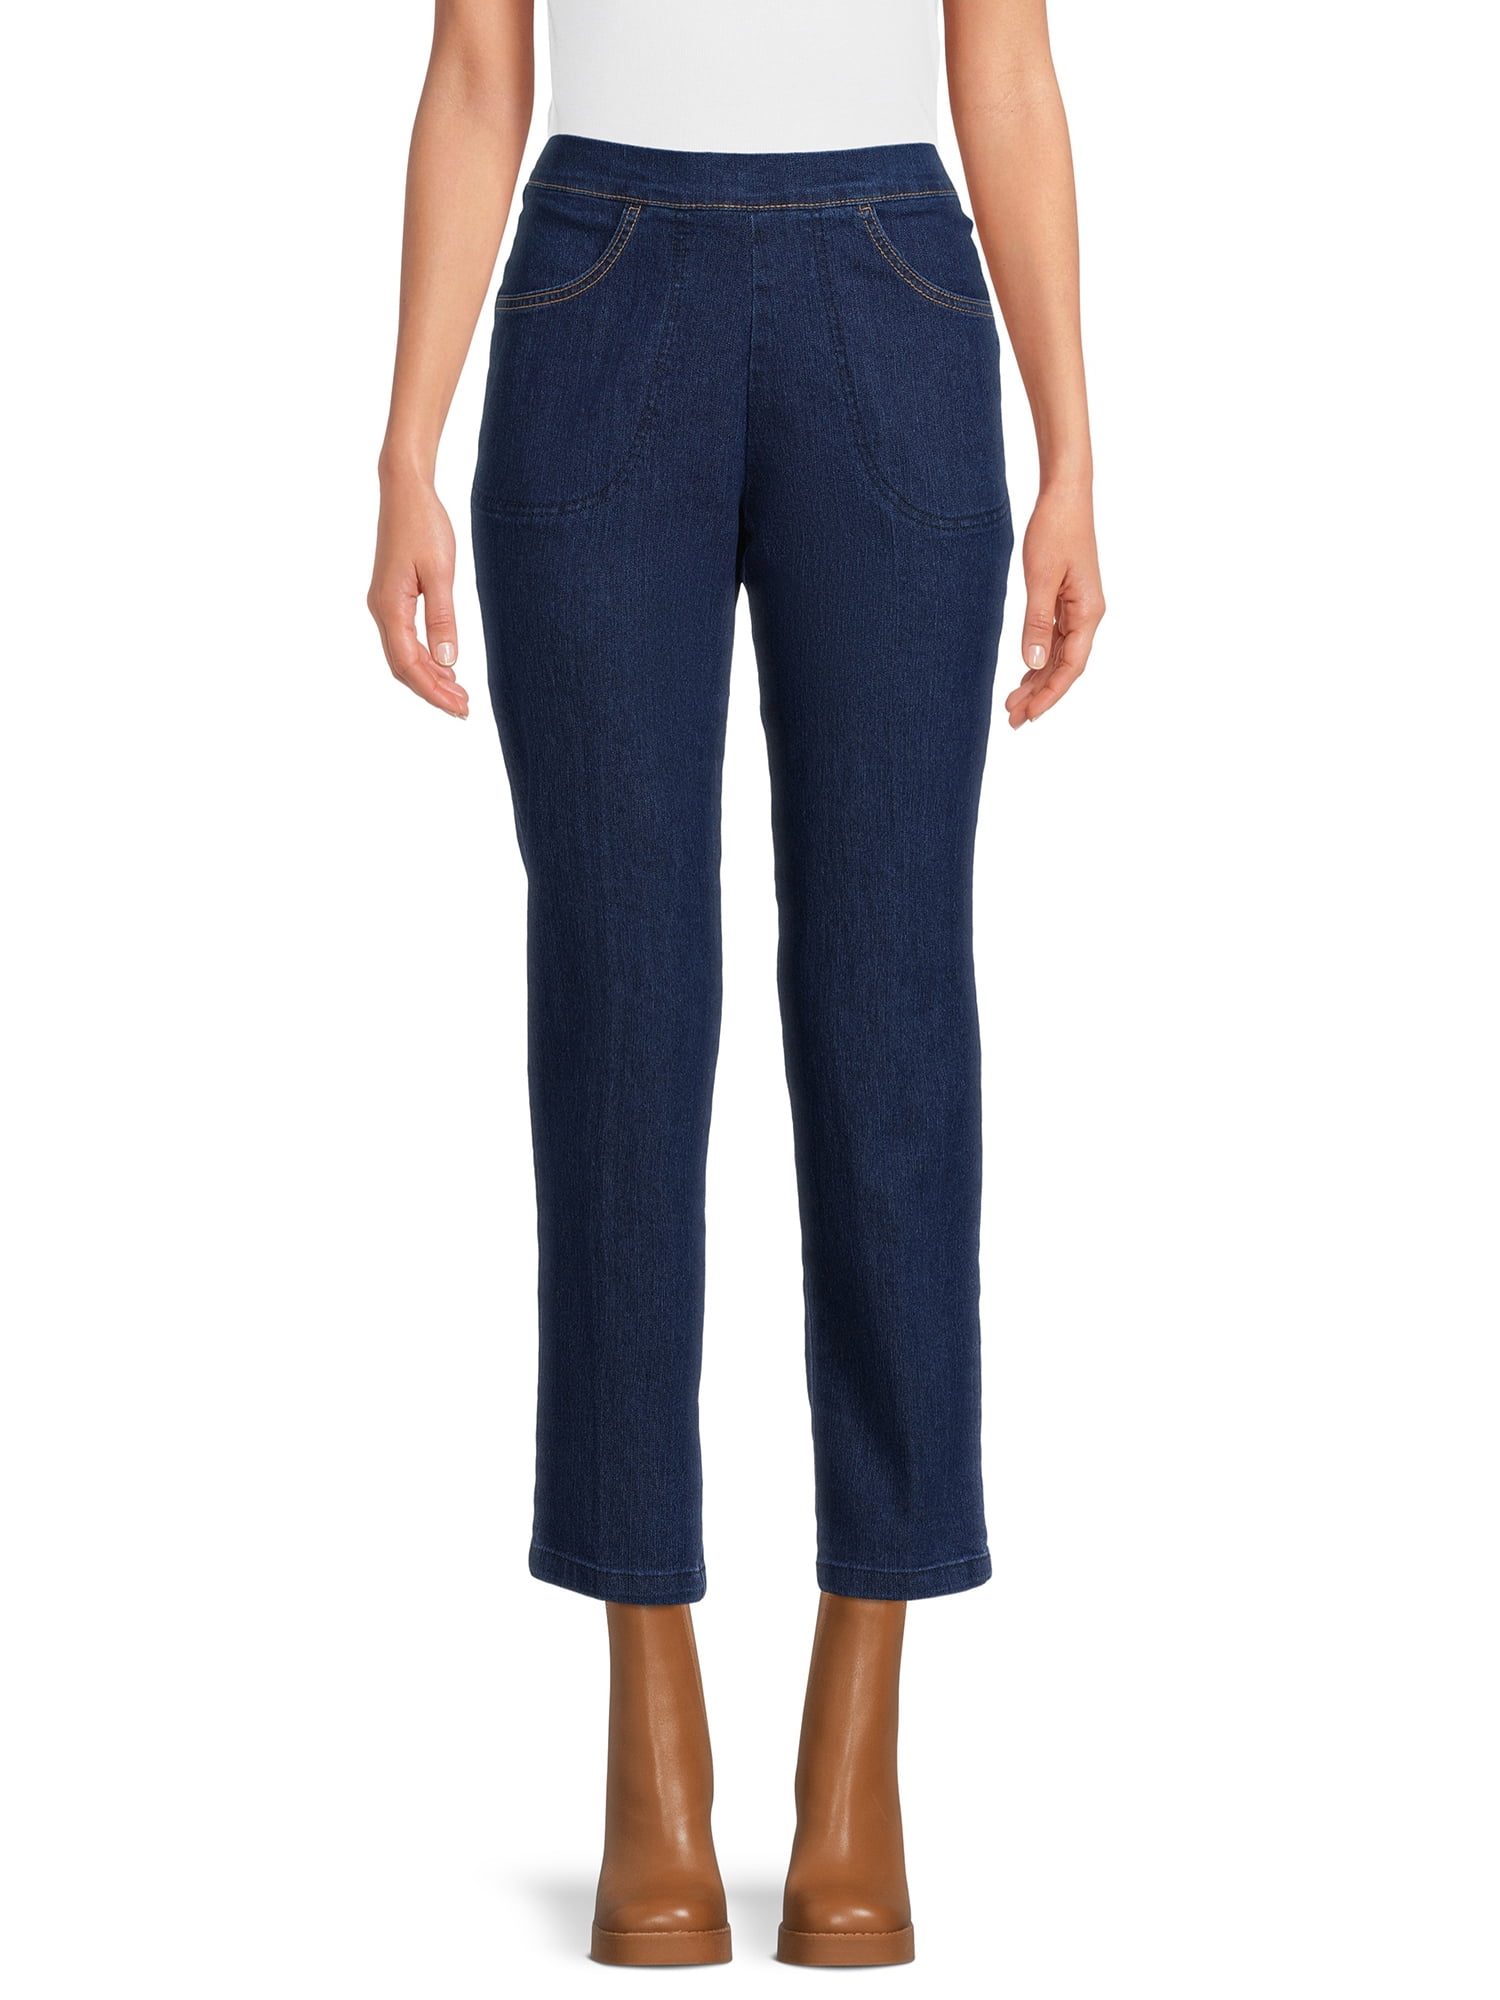 RealSize Women's Stretch Pull On Pants with Two Front Pockets ...